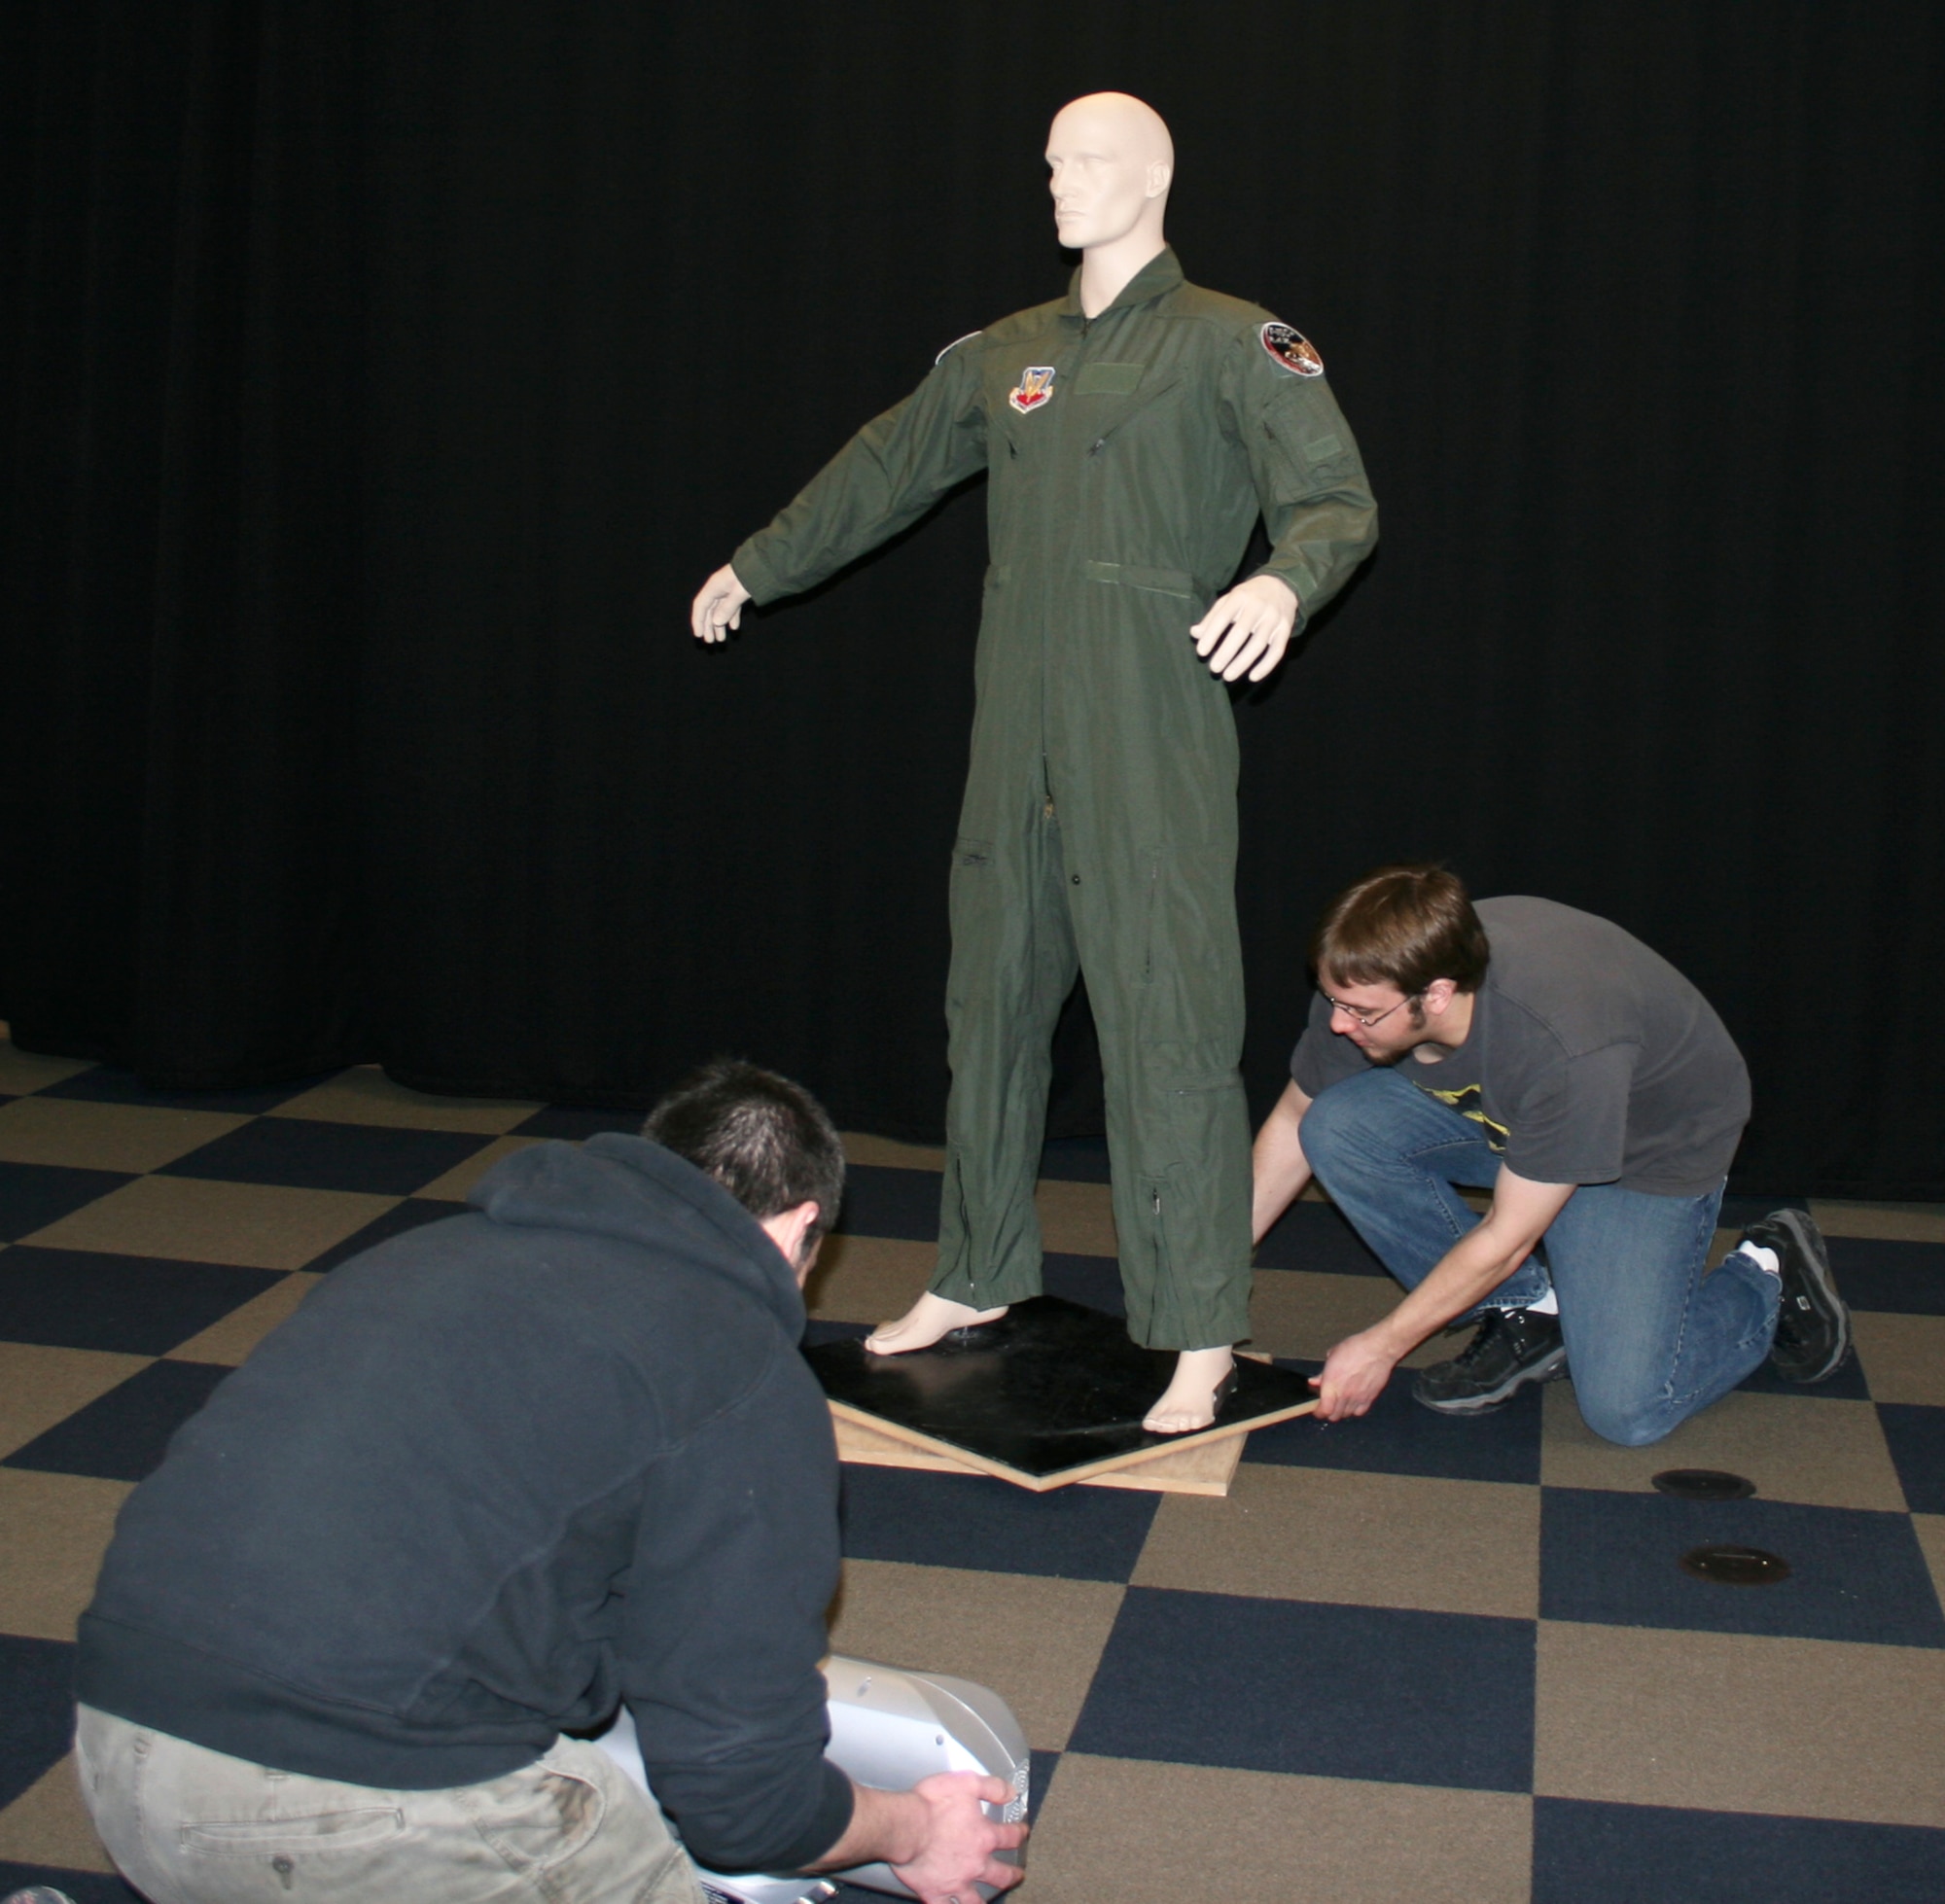 Brenton Mathews and David Pent, employees of Activision subsidiary Raven Software, position a mannequin with a flight suit from the 115th Fighter Wing in order to get a 3-D scan for use in current and possible future video games. Raven Software tries to scan authentic gear for use in their games to save artist time and also to extract a very high level of detail and authenticity for their games. (U.S. Air Force photo by Staff Sgt. Jon LaDue)